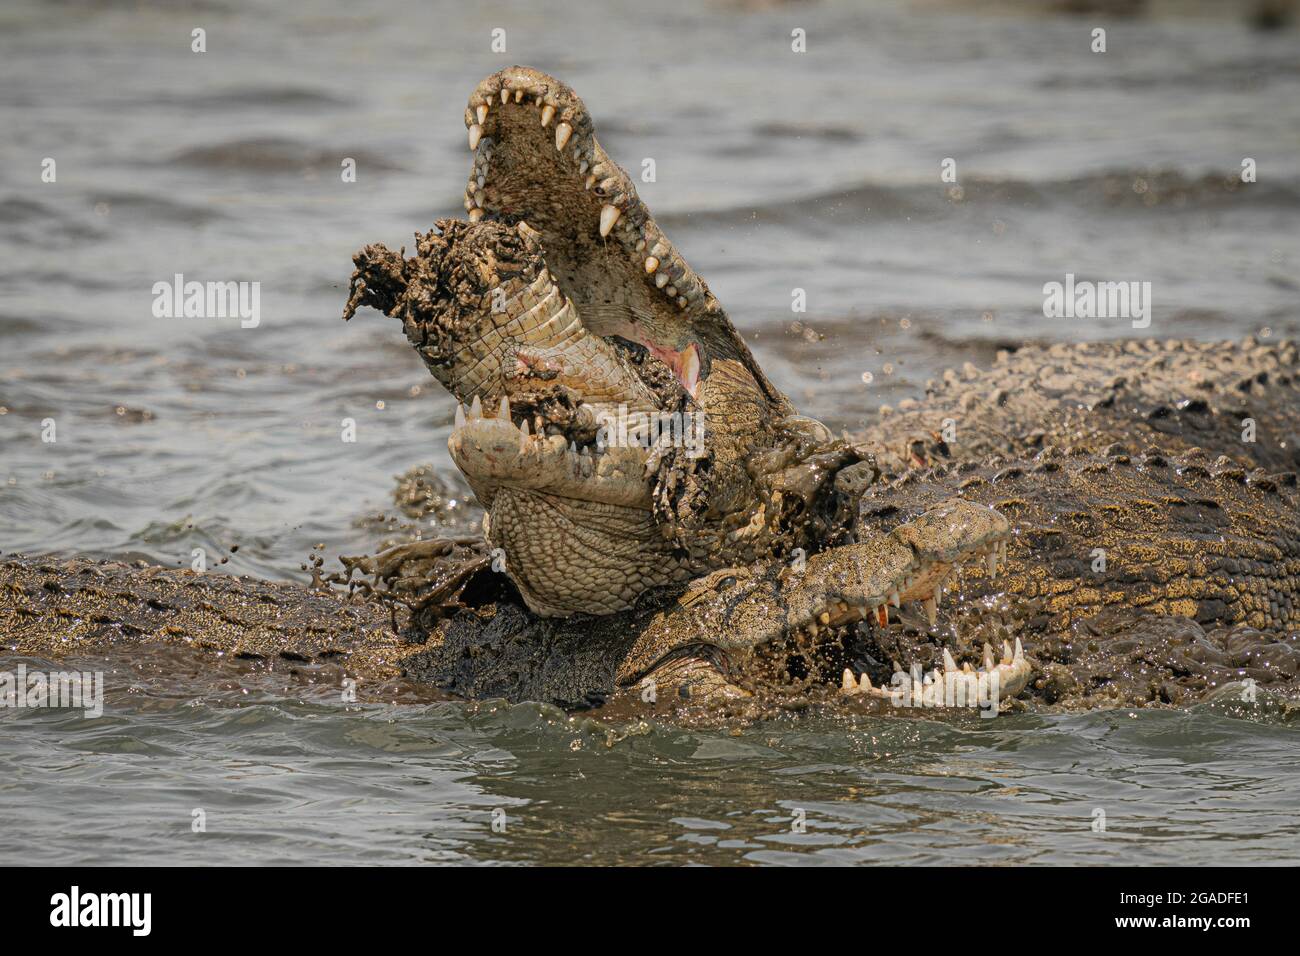 As it gripped its head with its sharp teeth, the innocent croc was swallowed whole. BOTSWANA, AFRICA: FEEDING FRENZY: Shocking images have captured a Stock Photo